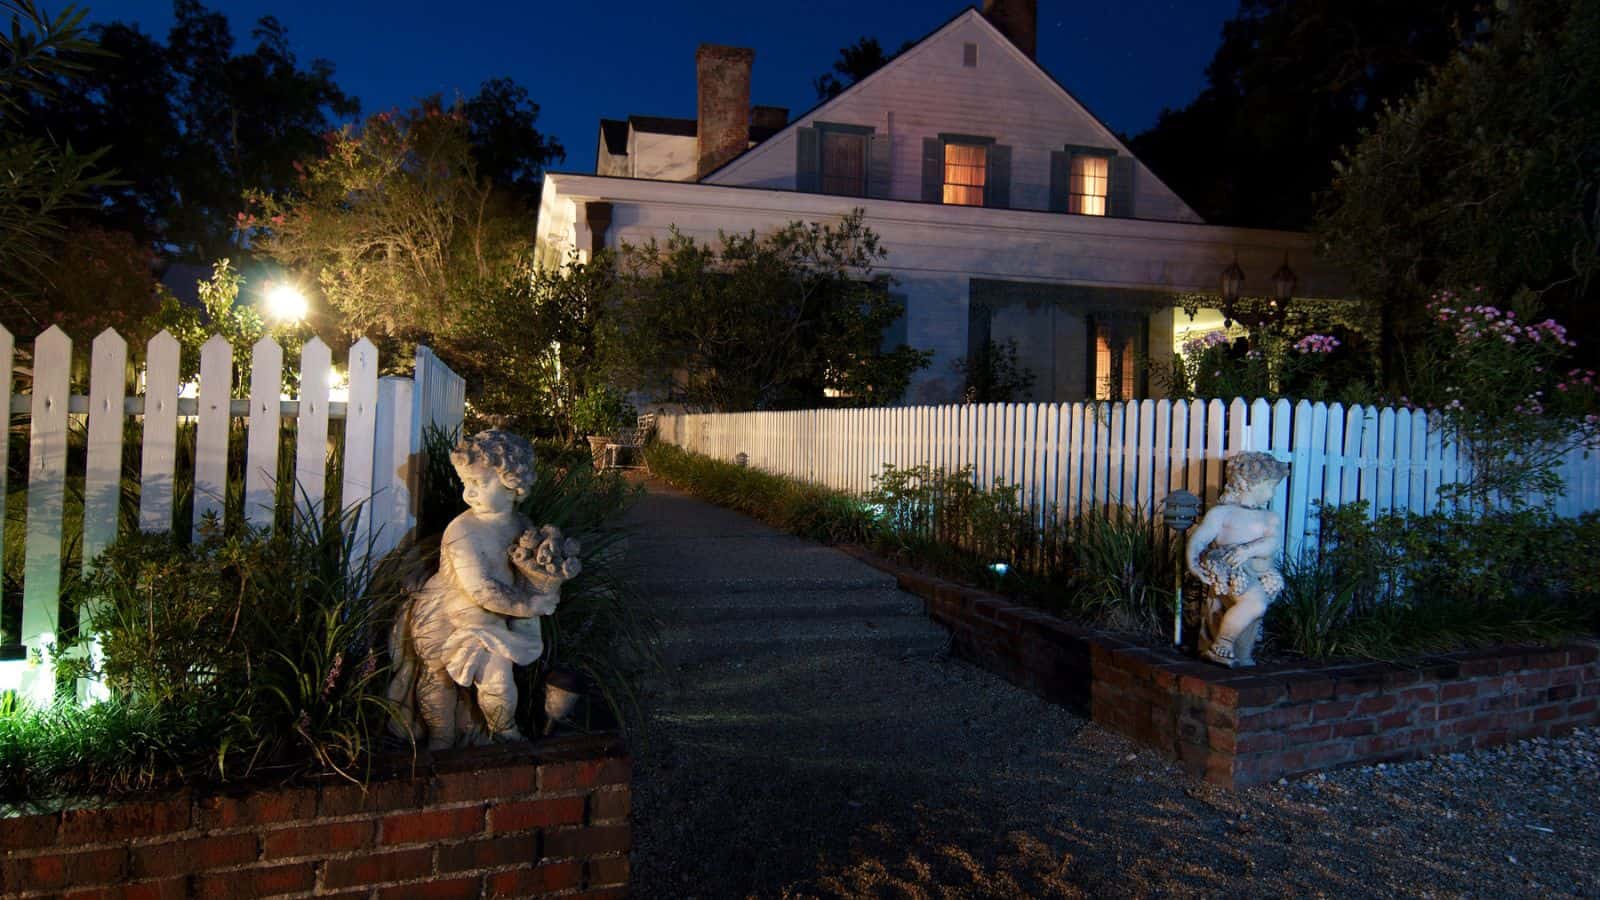 <p><span>Brace yourselves for a </span><a href="https://savvyolu.com/most-unaffordable-places-to-live-in-america/"><span>sleepover with the spirits</span></a><span>, my friends, because The Myrtles Plantation isn’t shy about its ghostly occupants. According to Wikipedia, Myrtles Plantation reportedly hosted 12 ghosts and witnessed ten murders. However, historical records indicate only one murder—that of William Winter. Today, this site has transformed into a bustling full-service restaurant and cozy bed and breakfast. </span></p><p><span>Known for its ‘pleasant’ inhabitants like the infamous Chloe and other less tangible guests, it’s the perfect spot to play a real-life game of Clue. Remember, the mirror selfies might capture more than your good side here.</span></p>